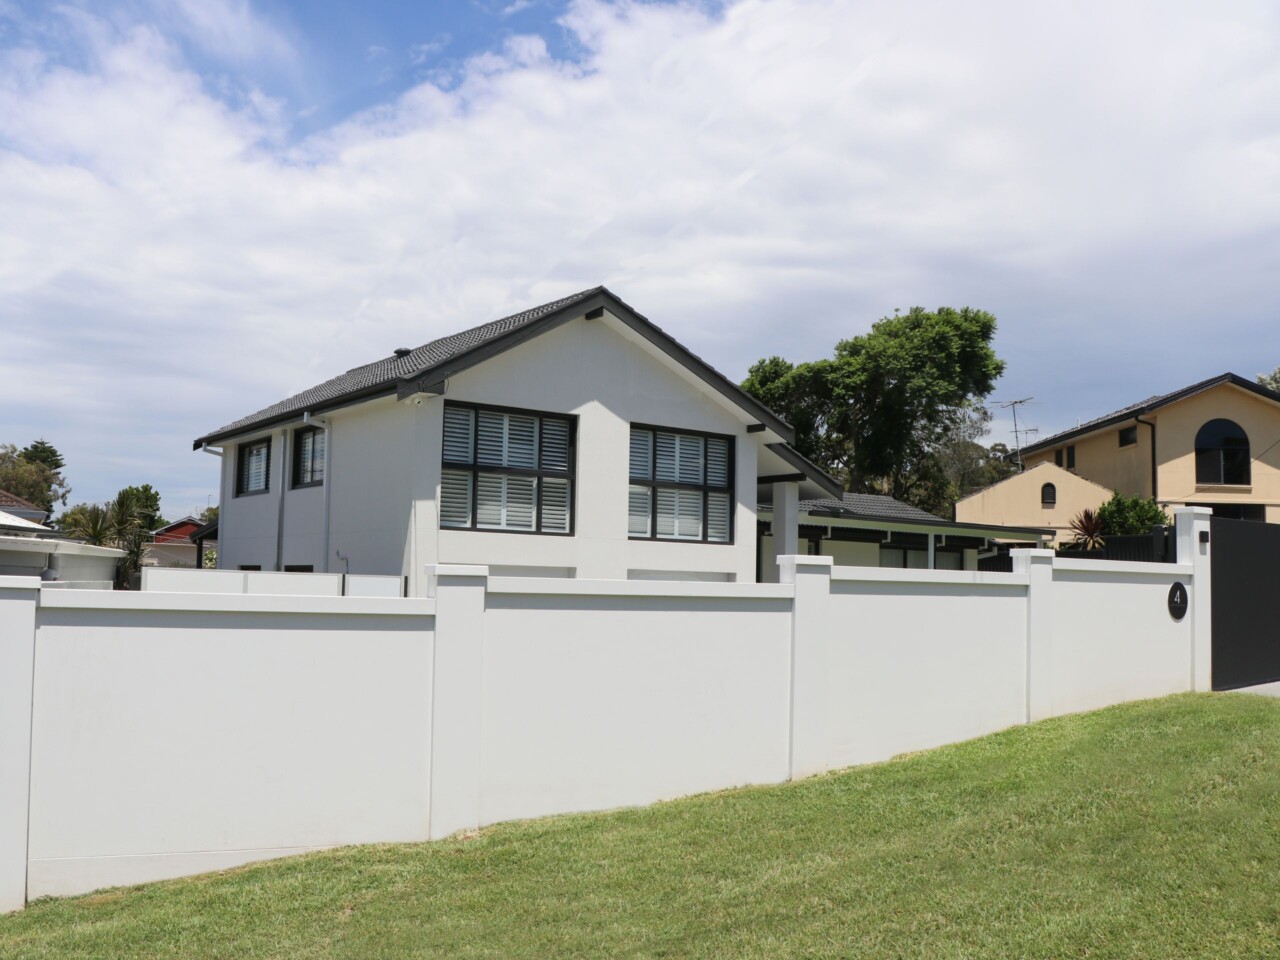 Modern front fence complements stunning renovation